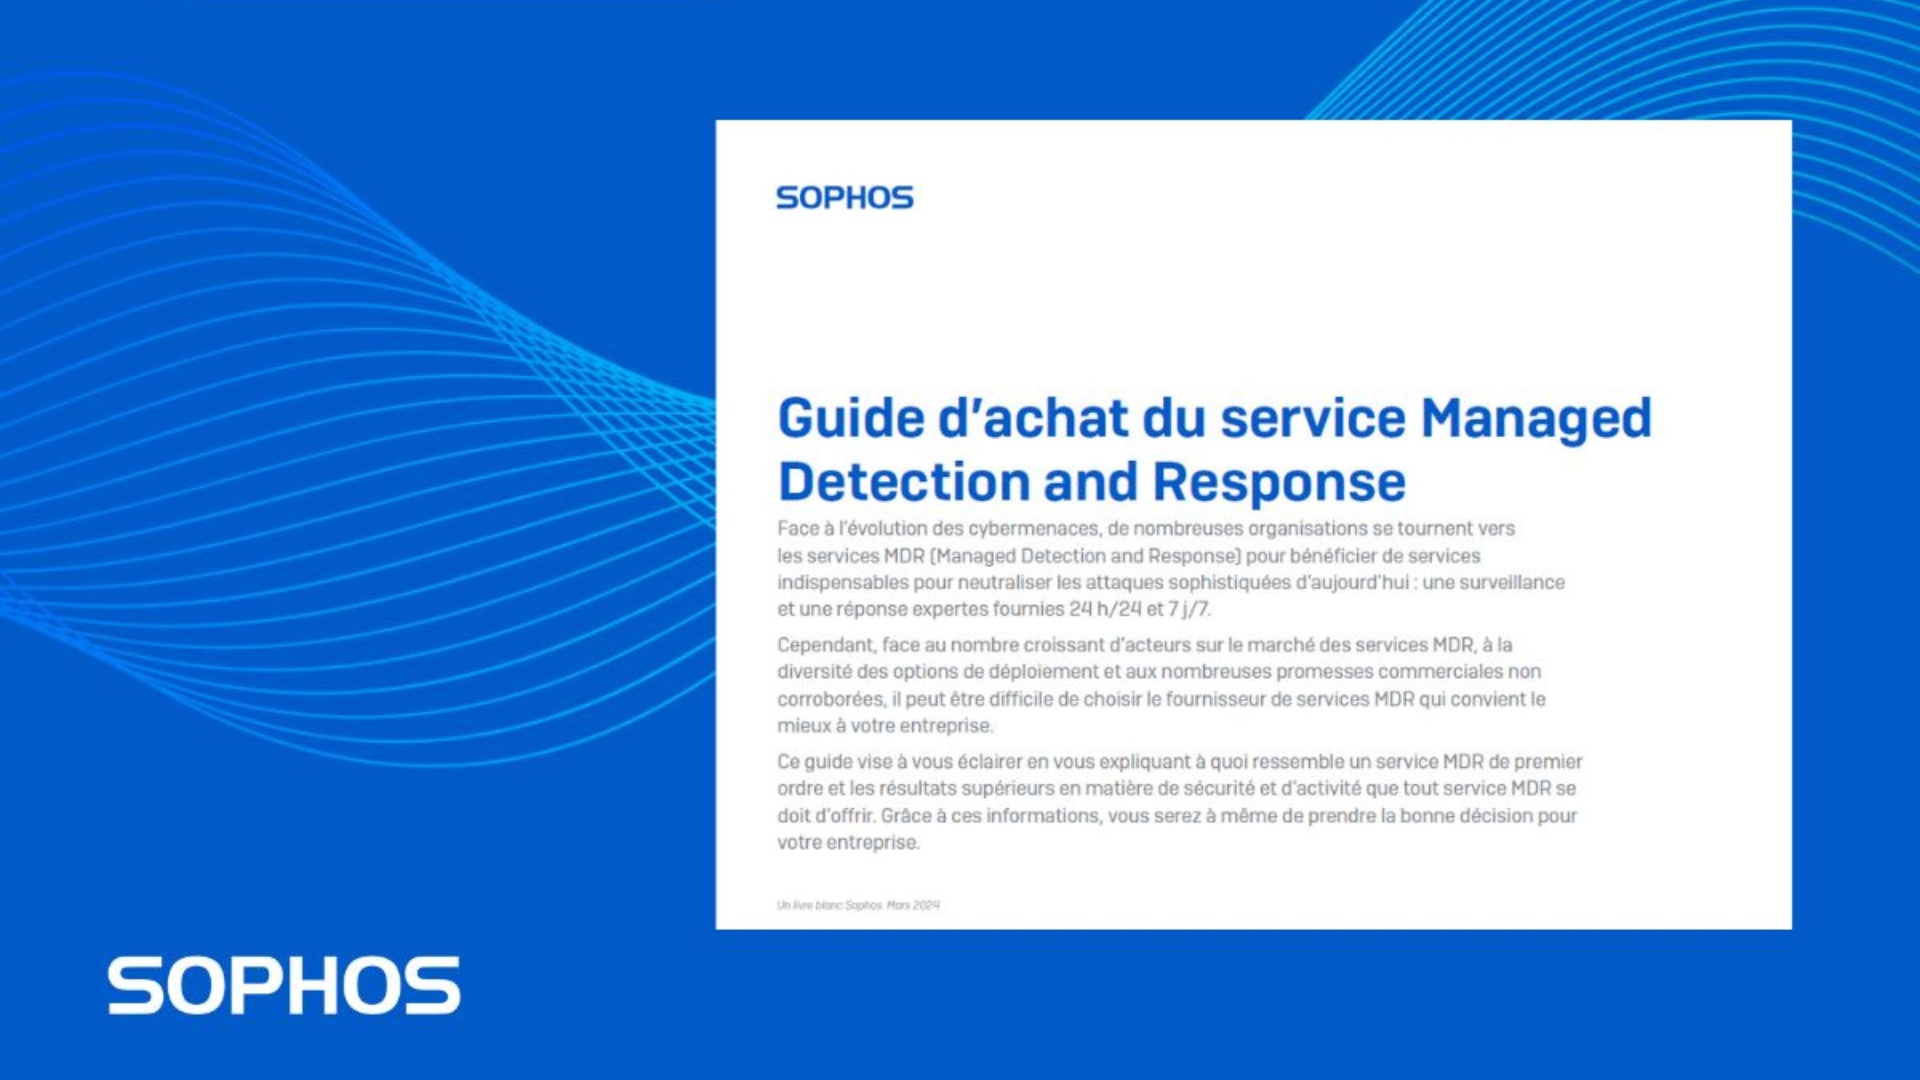 Guide d’achat de services MDR (Managed Detection and Response)